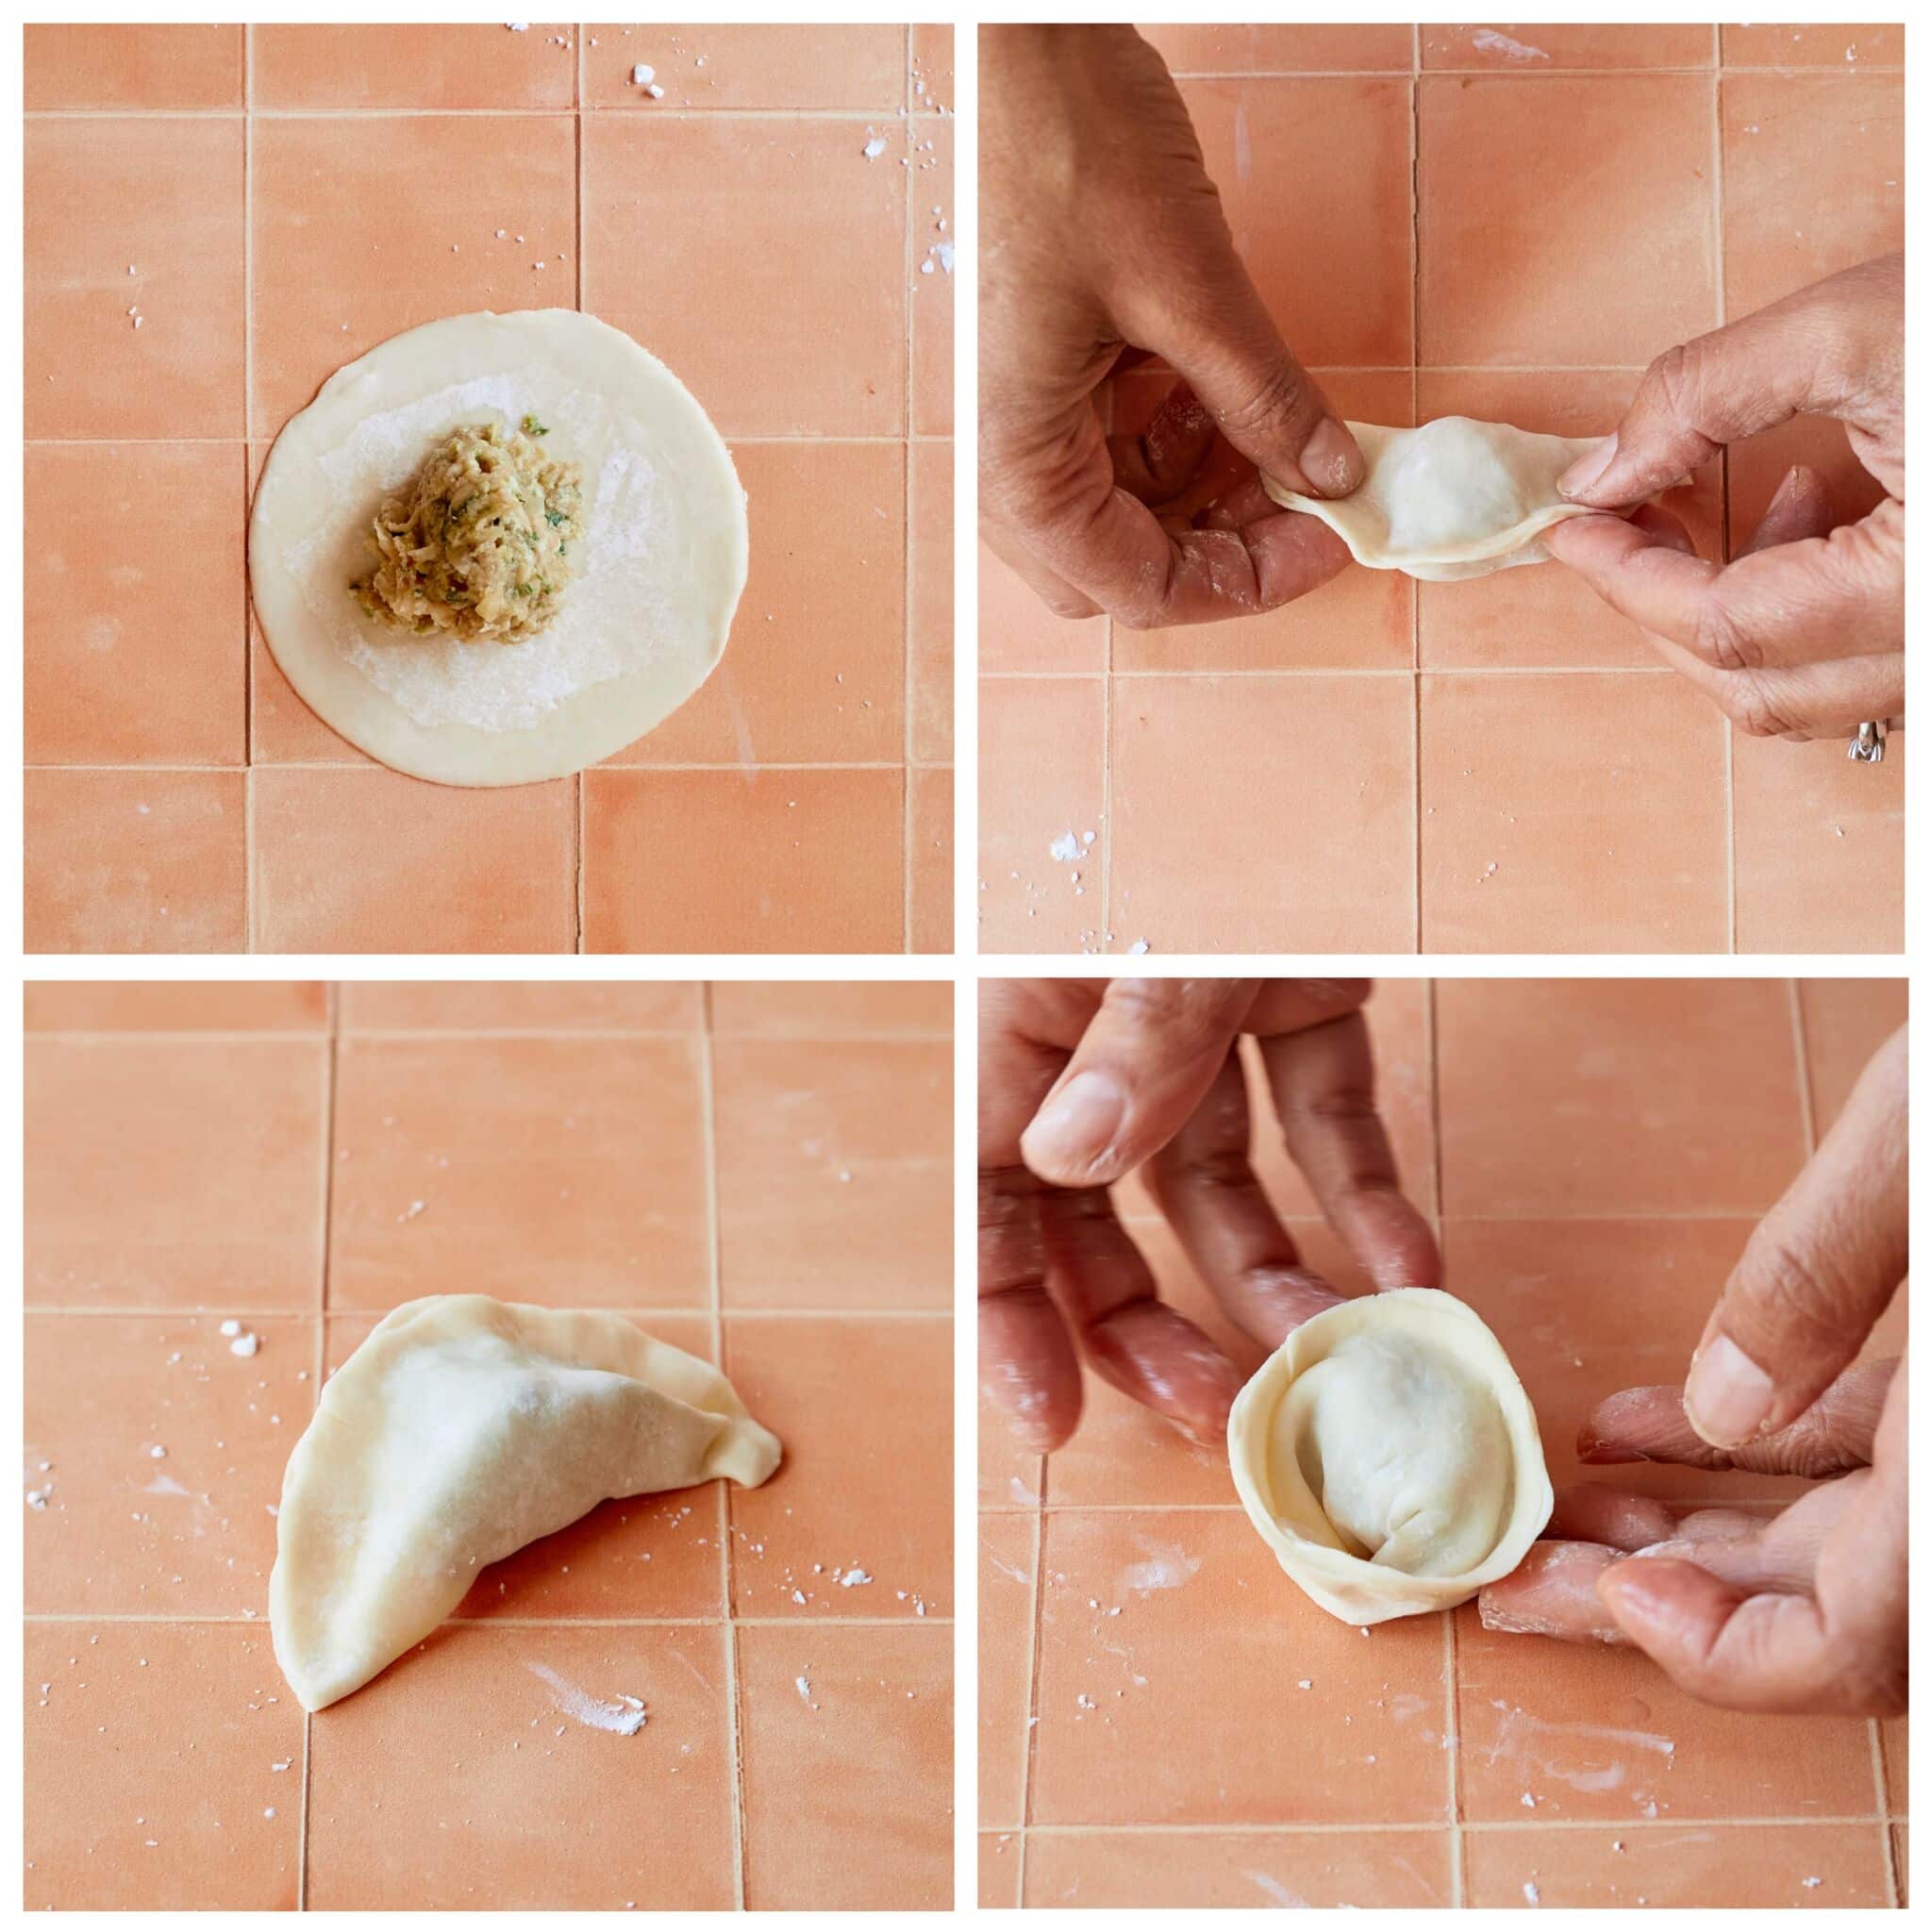 Making dumplings with homemade wrappers. Put filling in the center of the dumpling wrapper, fold and seal up the edge. Fold the dumpling to press the two corners together. 